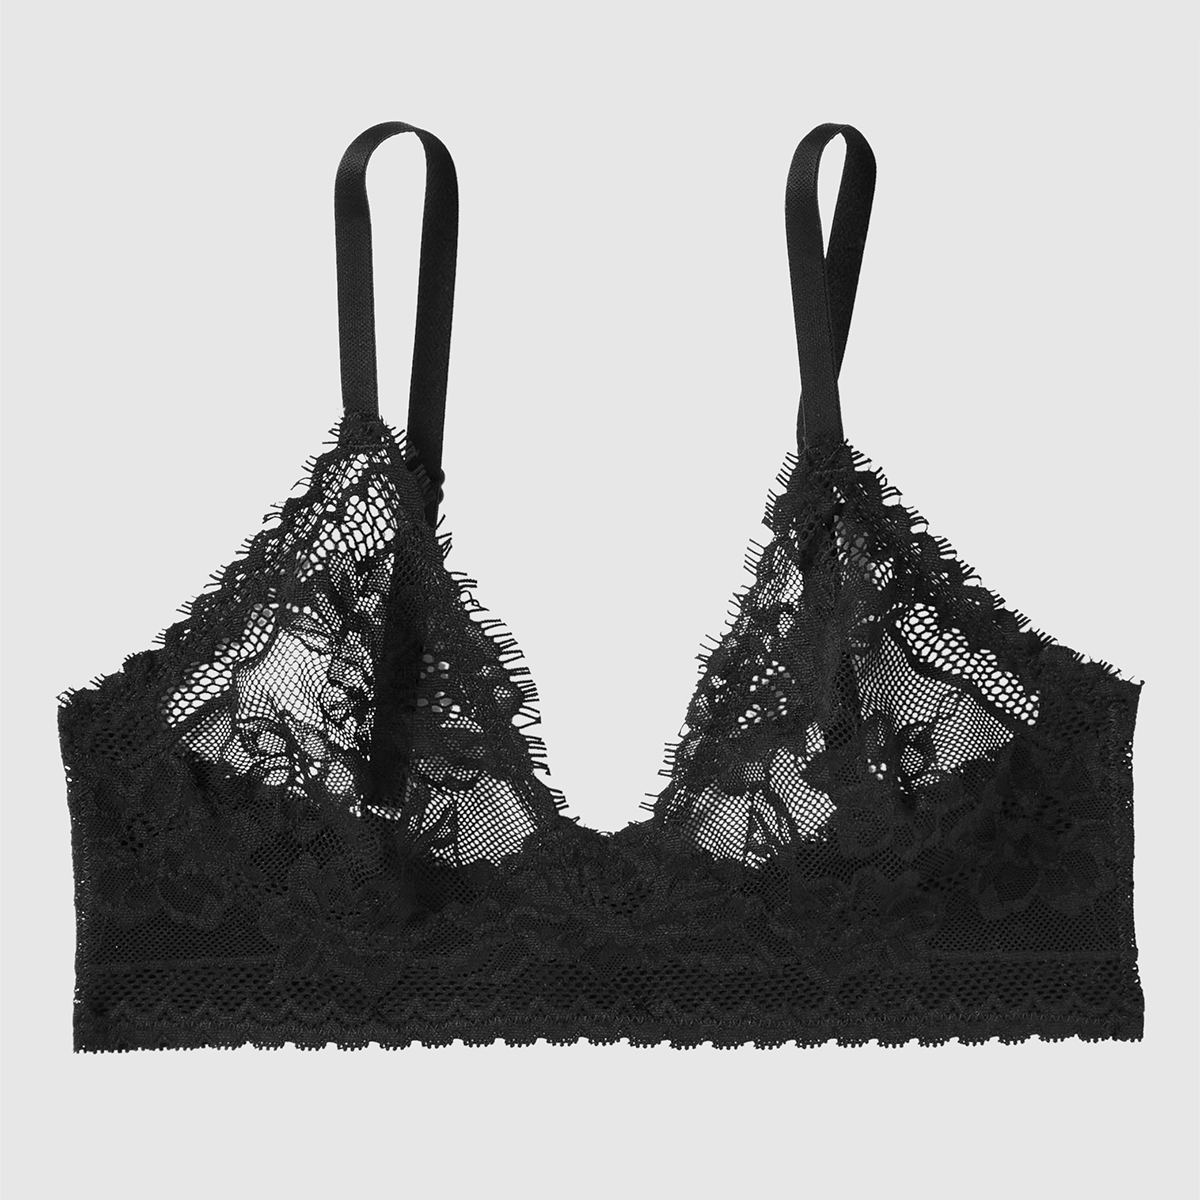 Buy 3 Pack Embroidered Lace Bras - Black/White - 42B - Bfab UAE